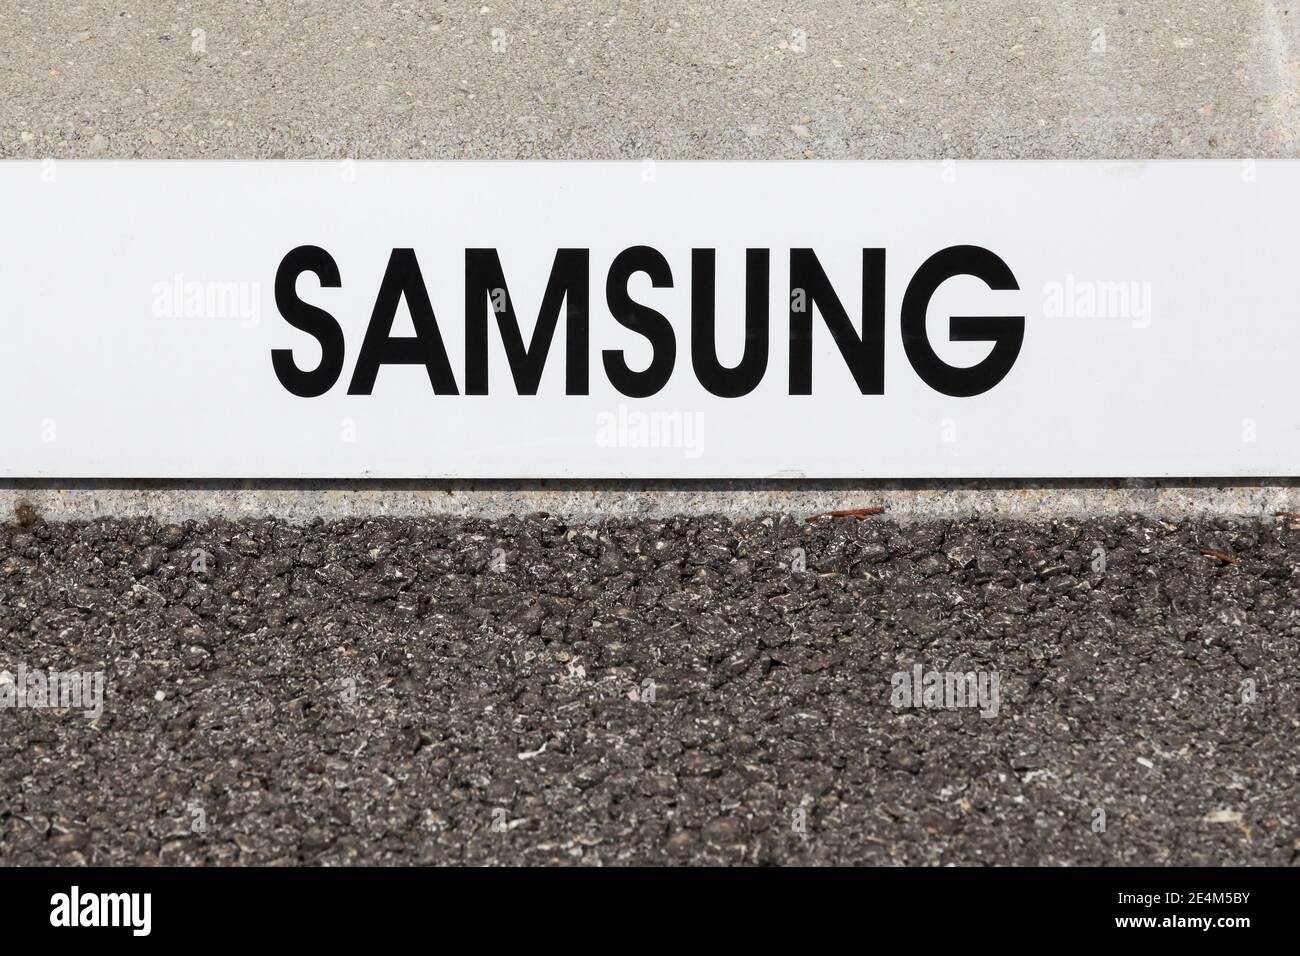 Saint Priest, France - May 16, 2020:  Samsung sign on a signboard. Samsung is a South Korean multinational conglomerate company Stock Photo